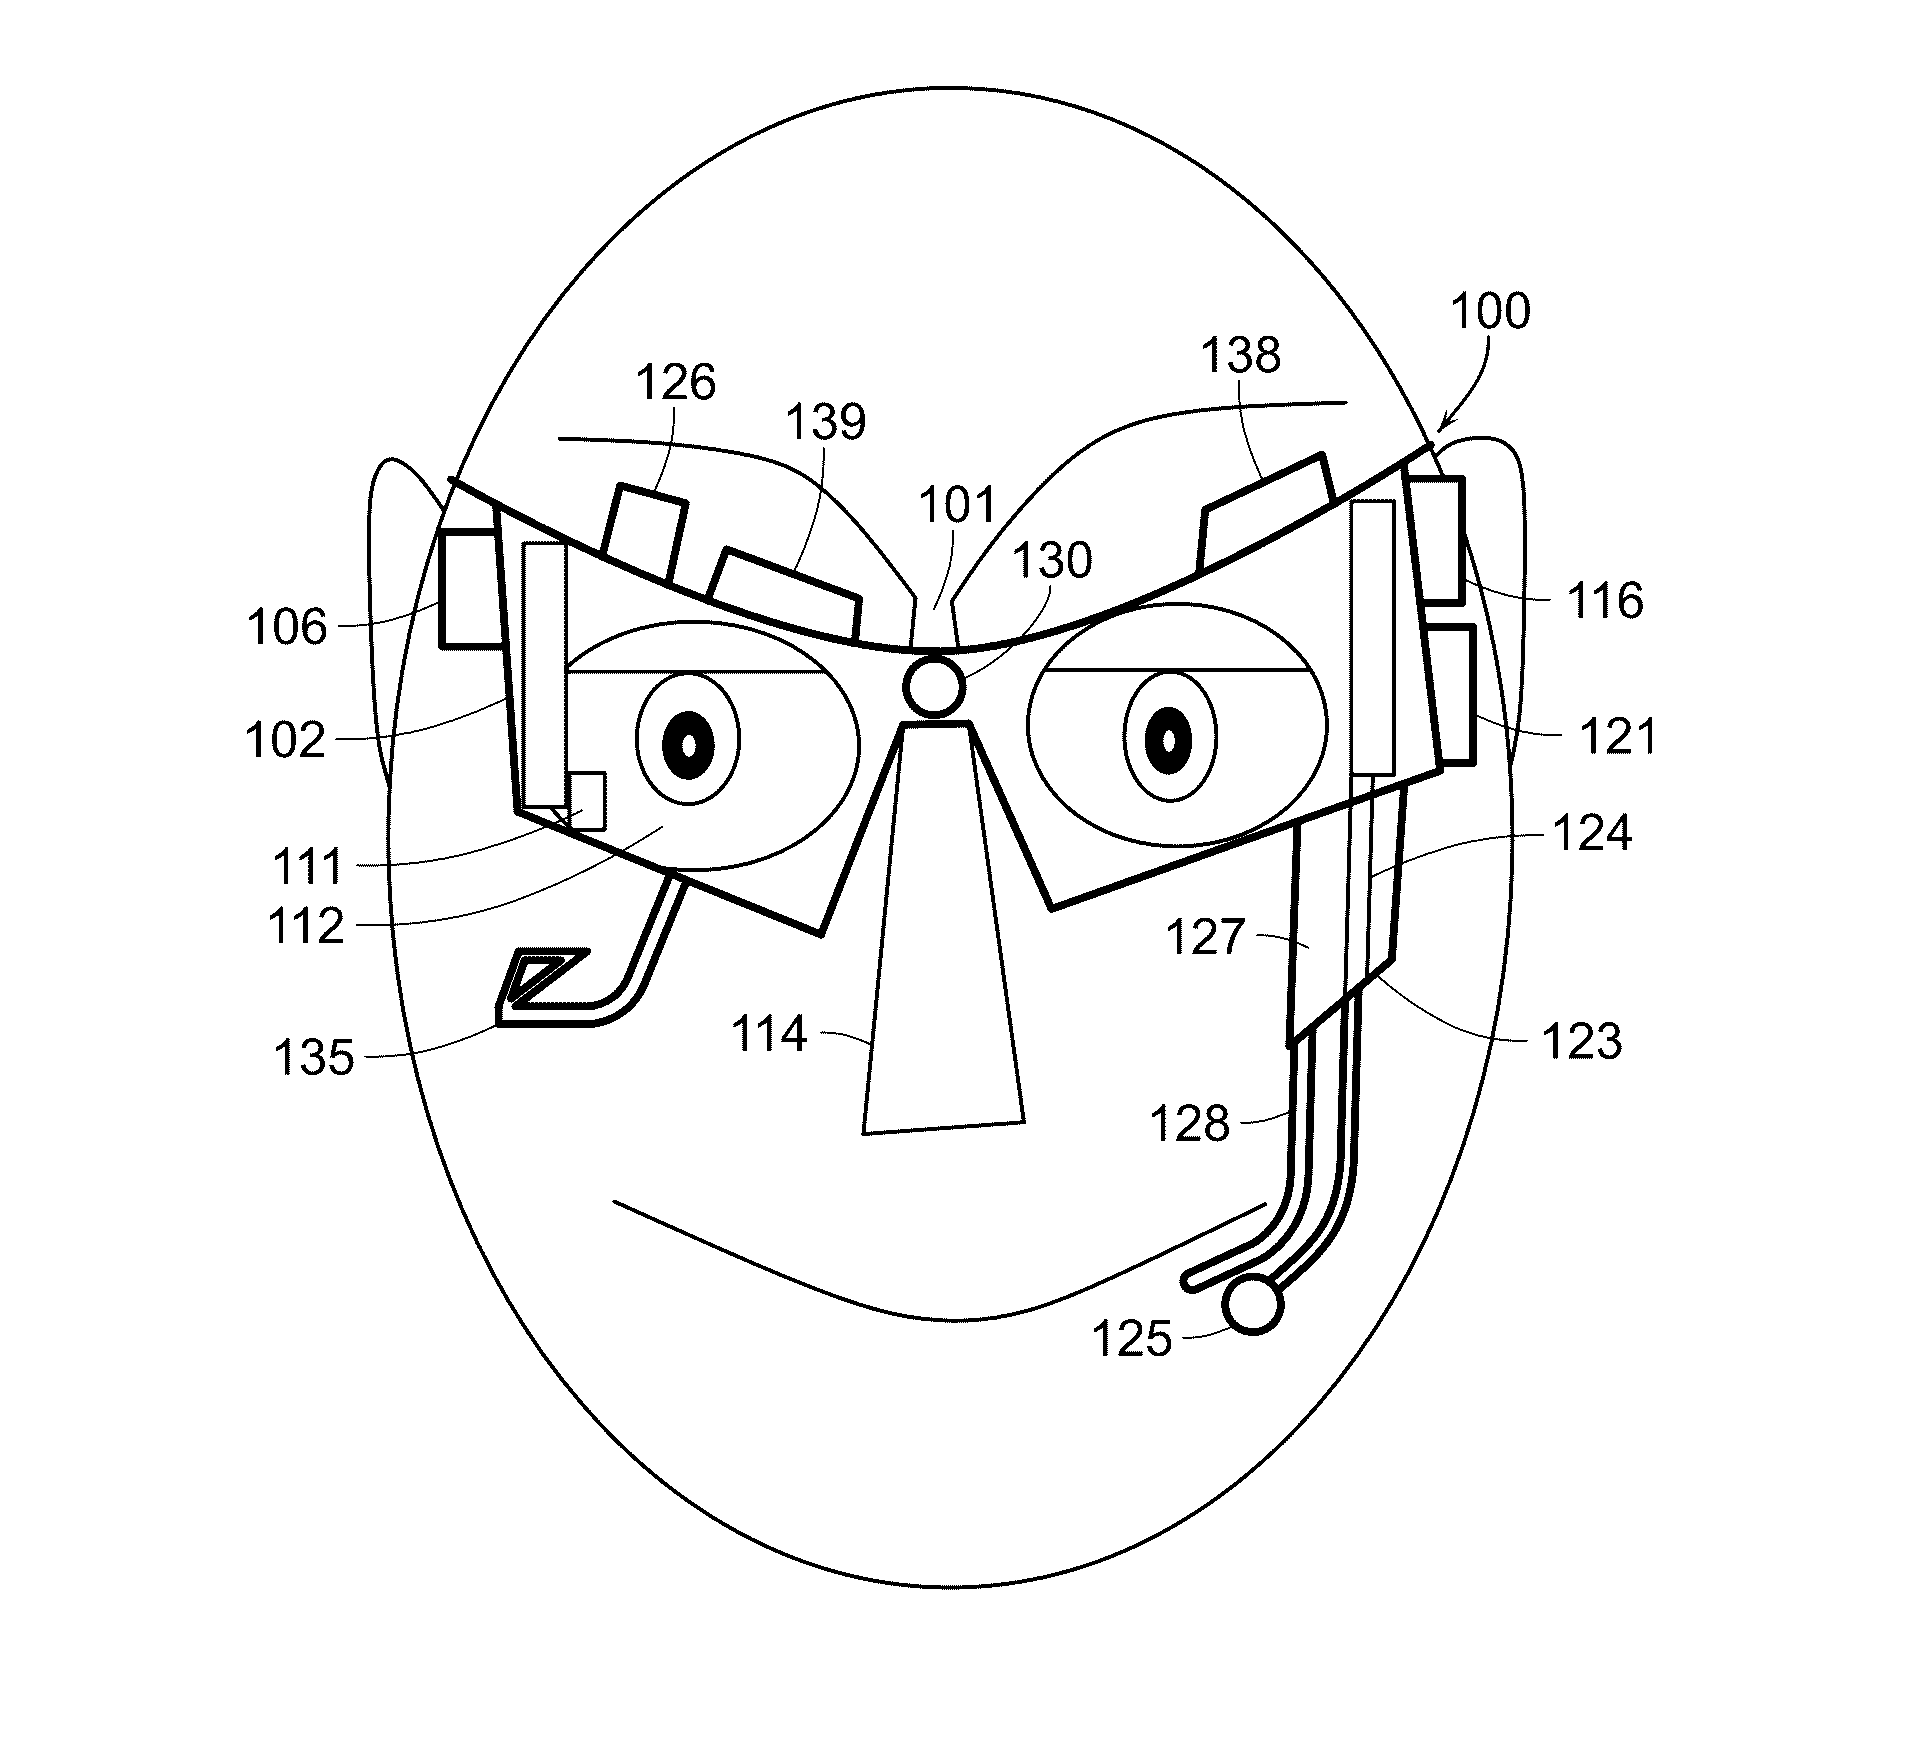 Eye and head tracking device